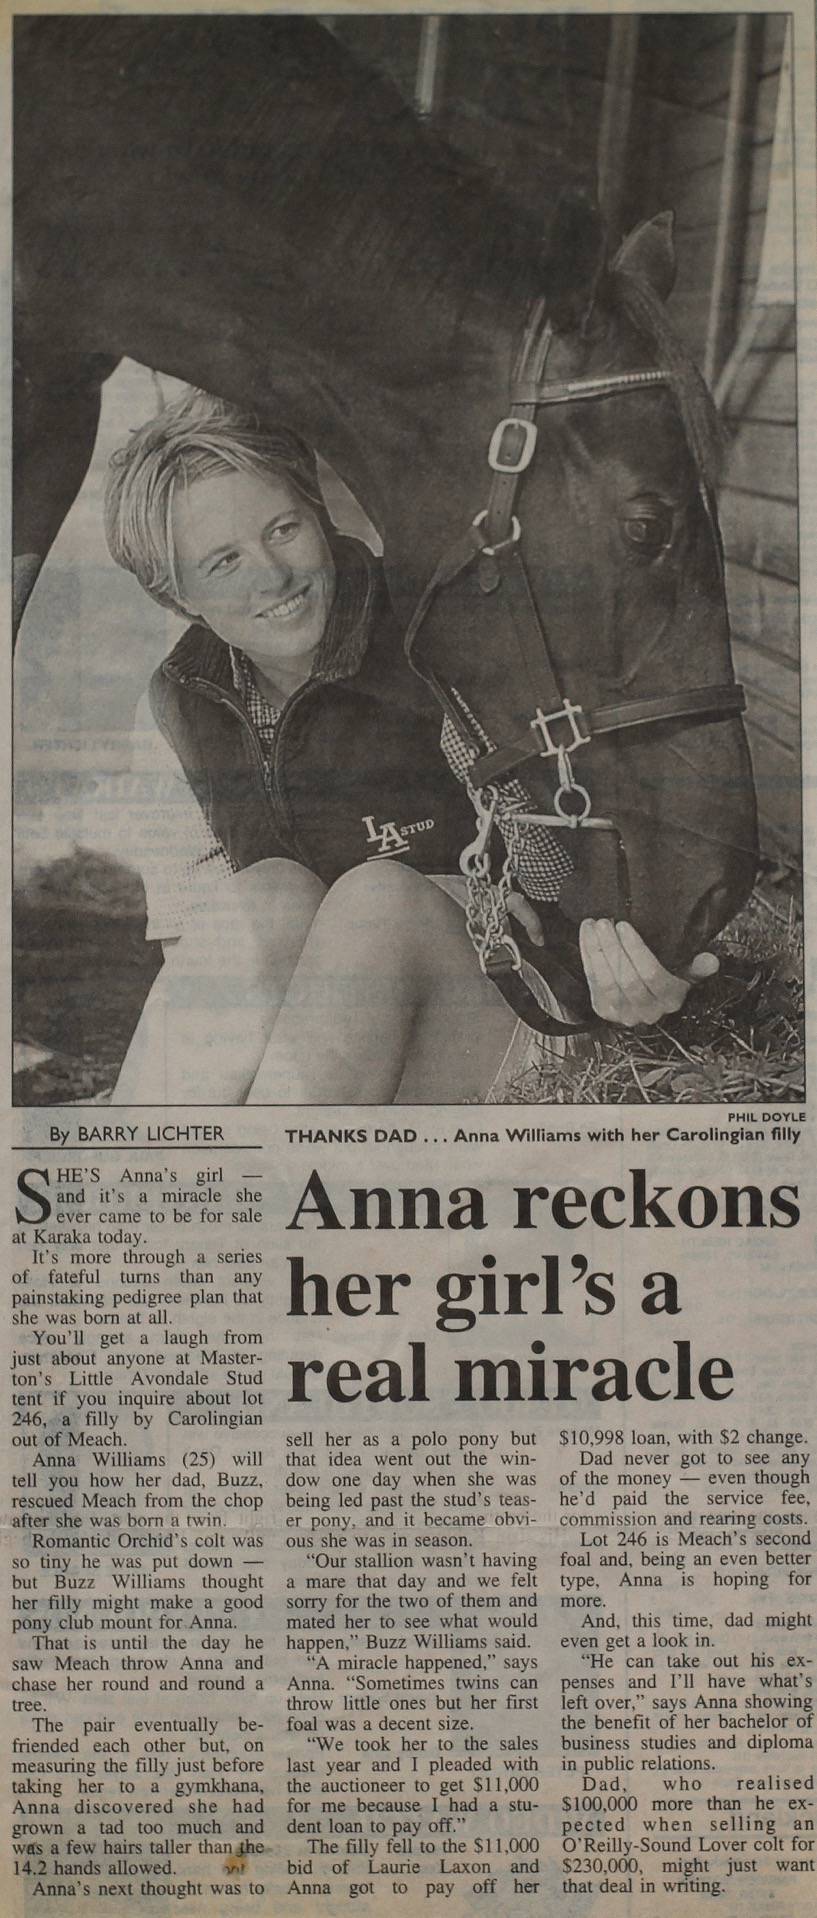 Anna reckons her girl's a real miracle